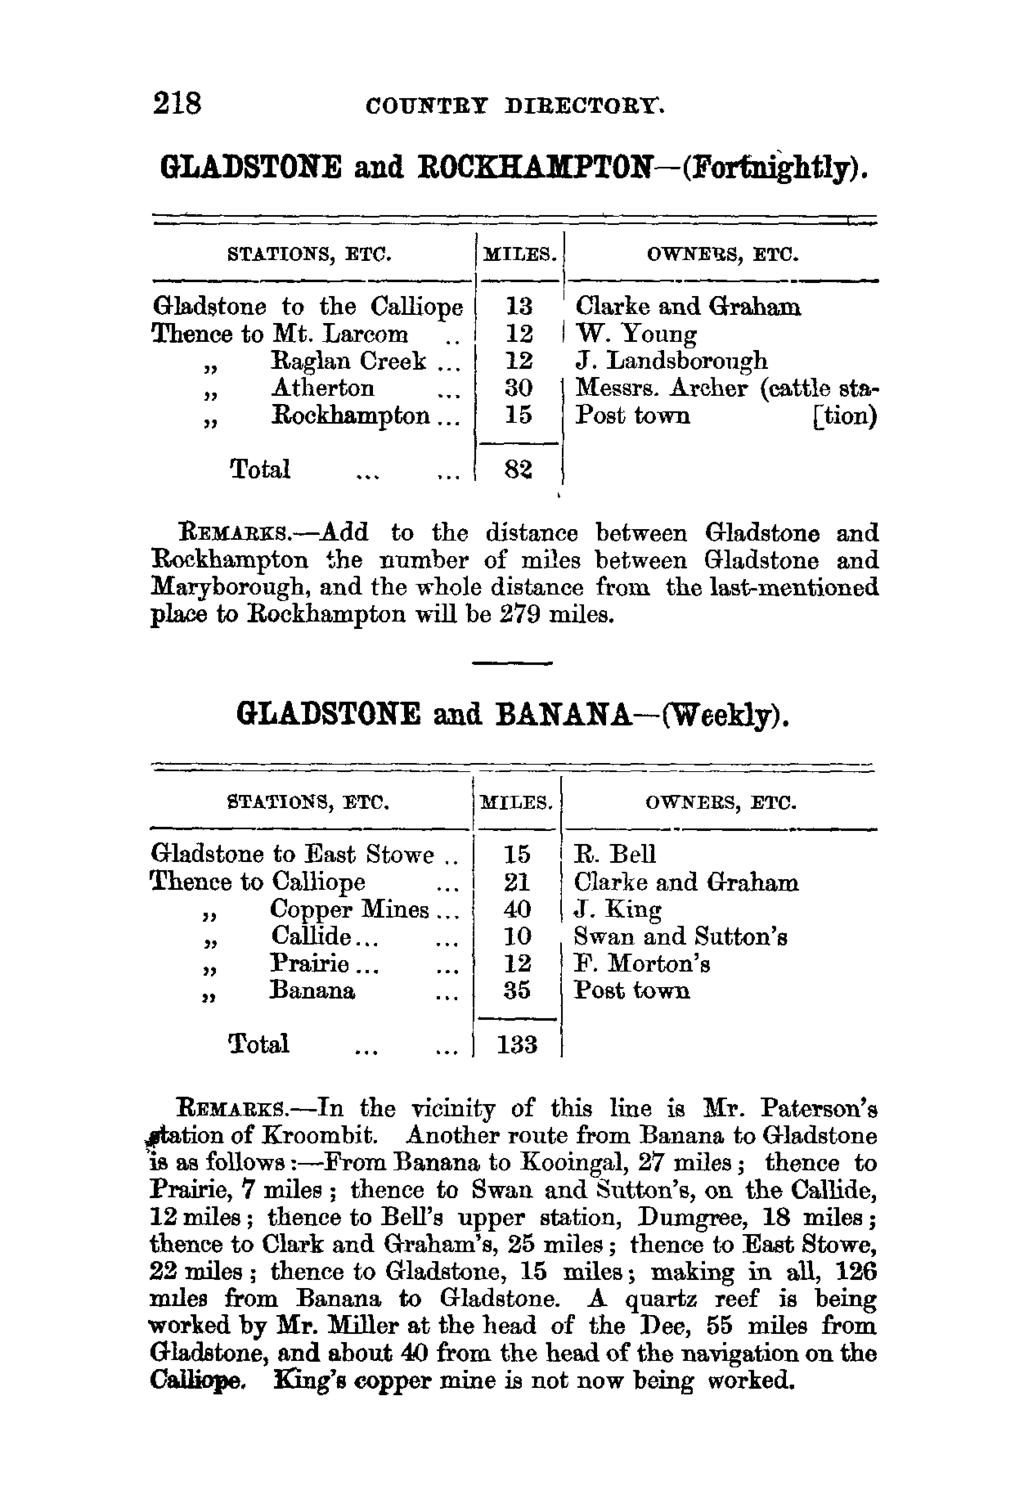 218 COUNTRY DIRECTORY. GLADSTONE and ROCKHAMPTON-( Fortnightly). STATIONS, ETC. MILES. I OWNERS, ETC. Gladstone to the Calliope 13 Clarke and Graham Thence to Mt. Larcom 12 W. Young Raglan Creek.